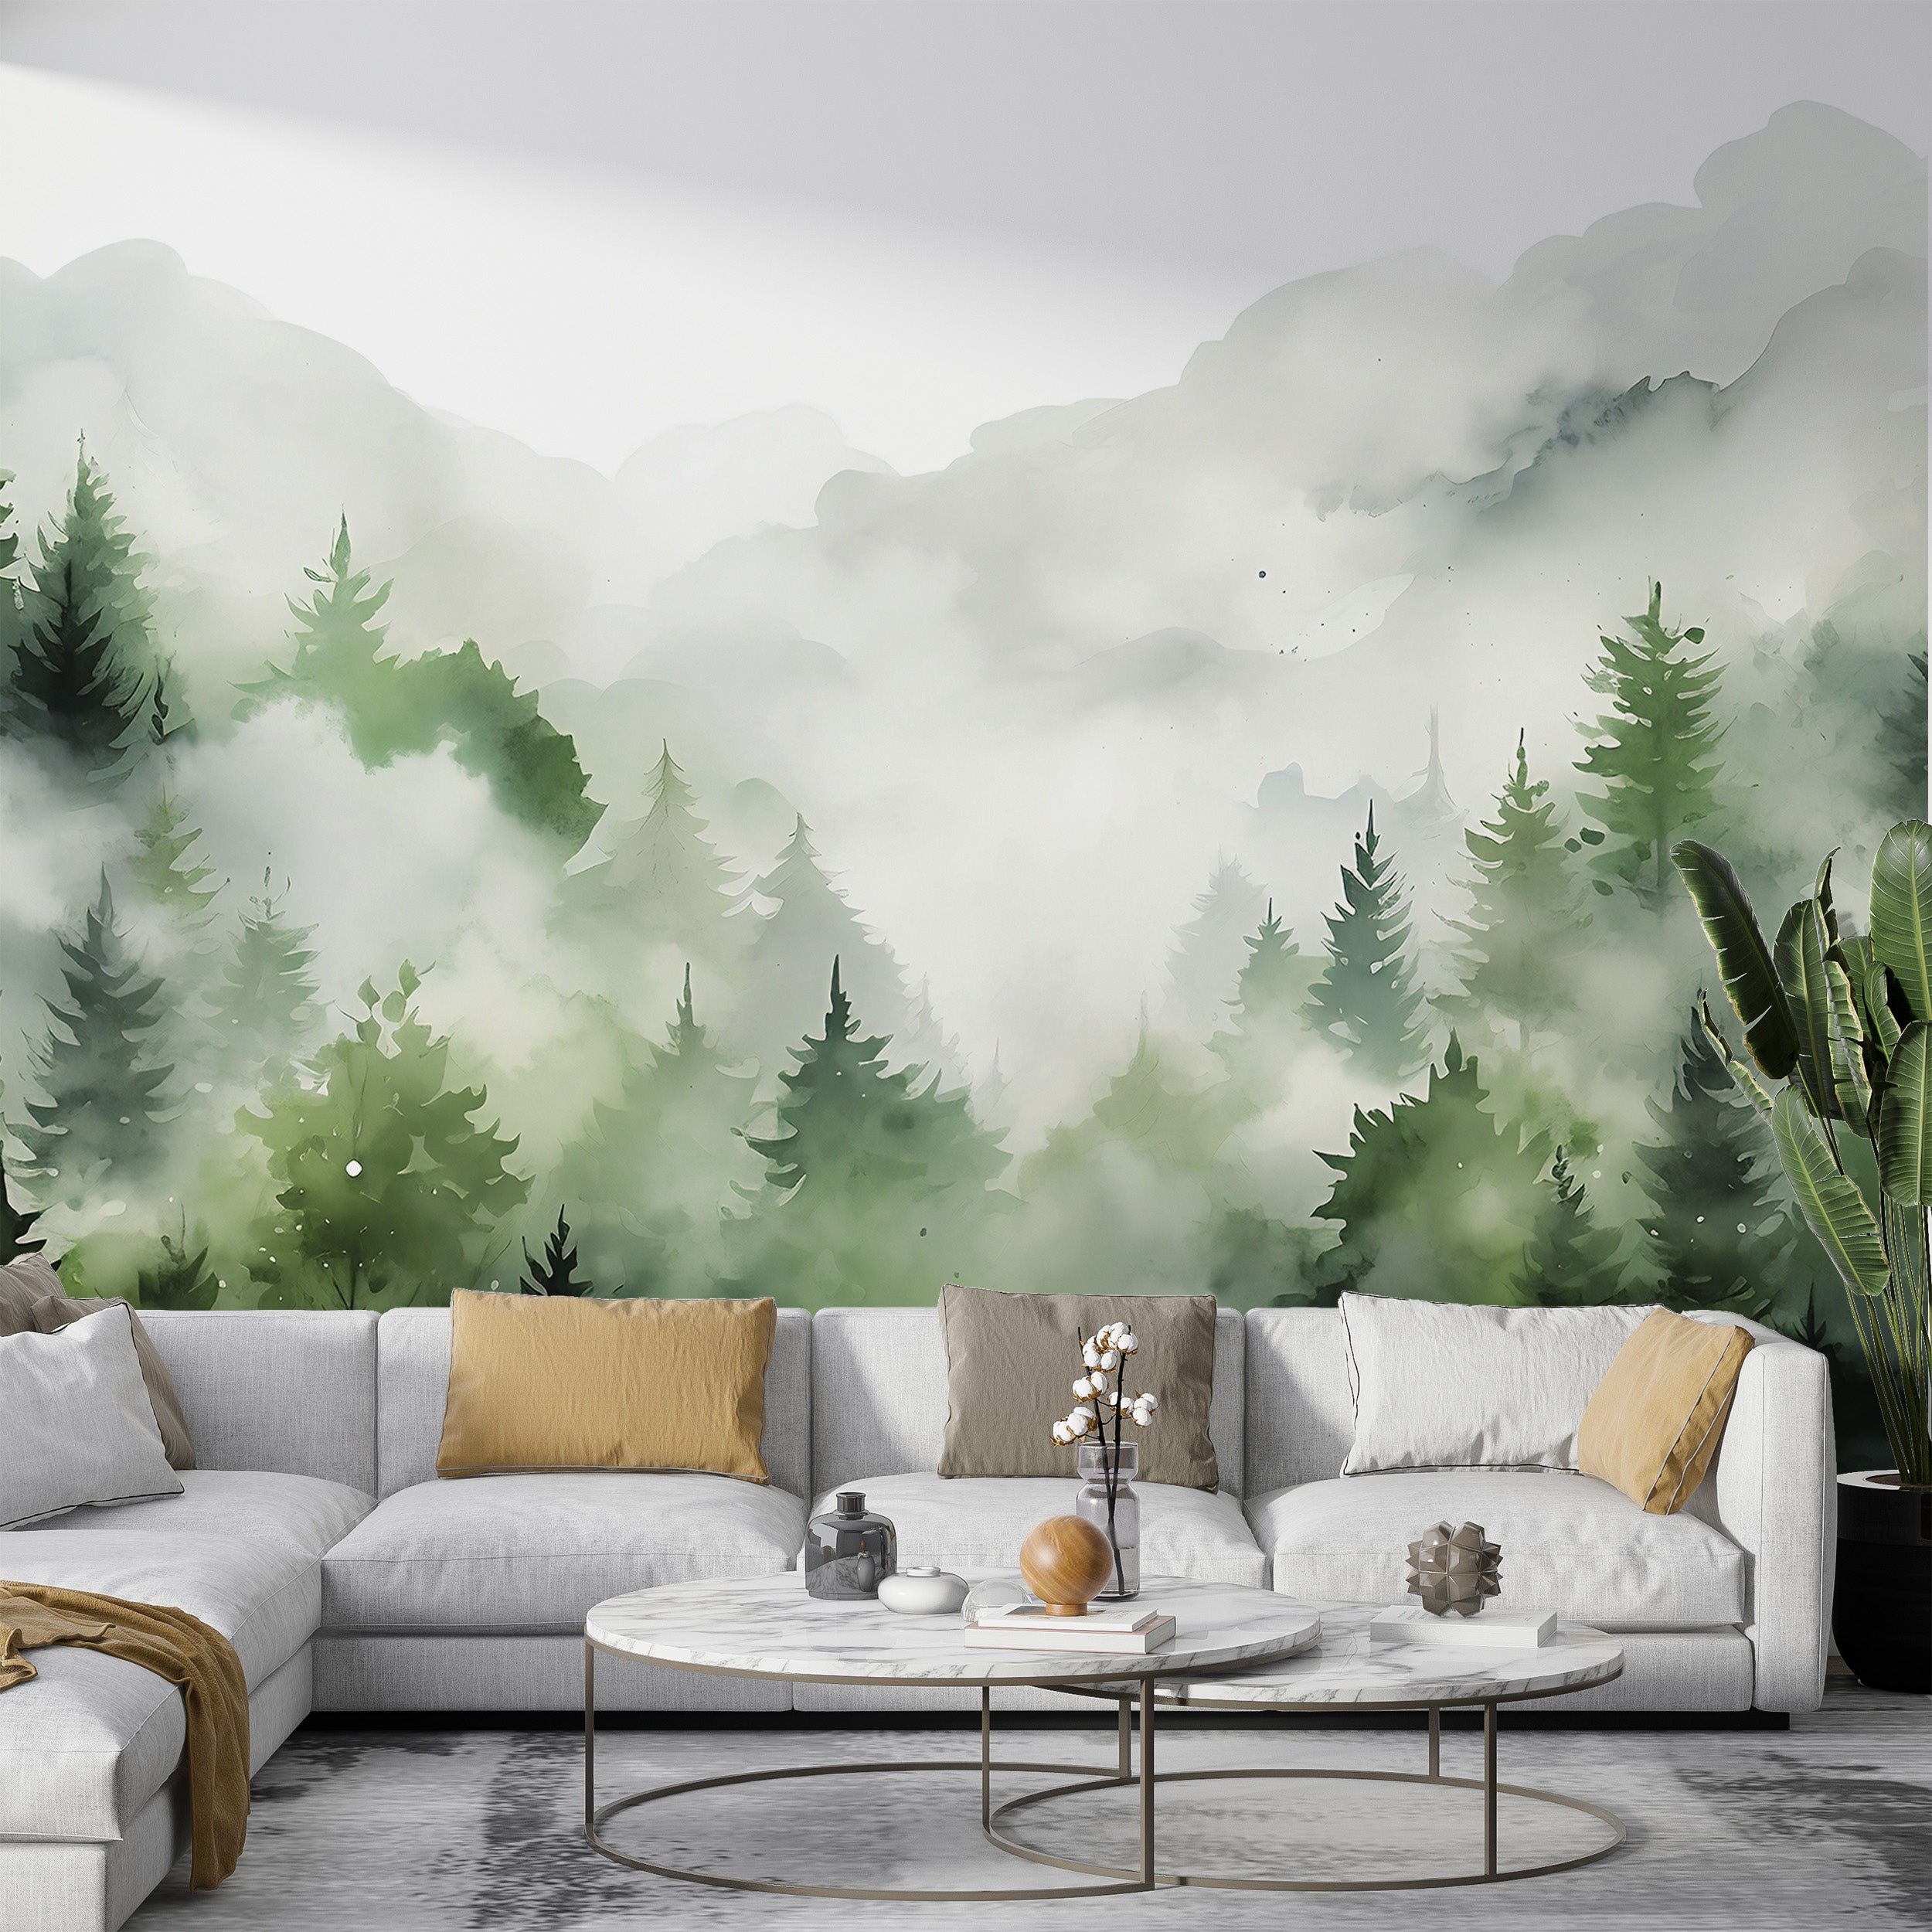 Tranquil Foggy Forest Mural for Relaxing Decor